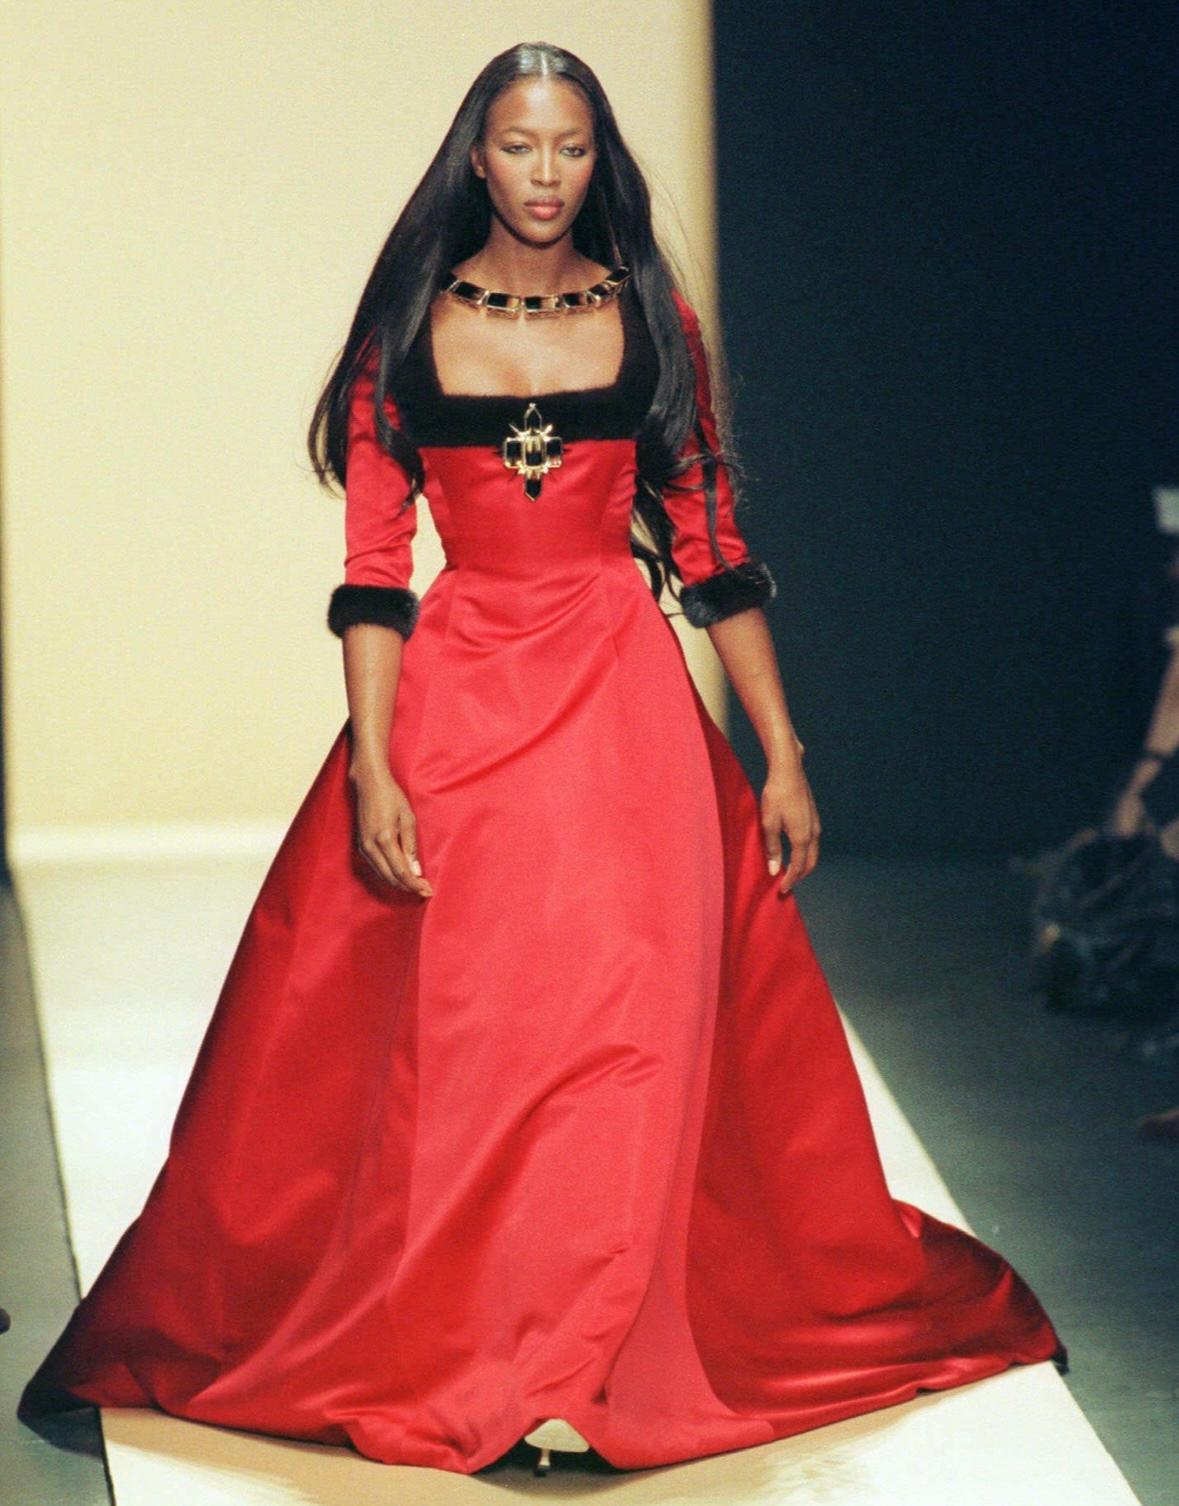 Presenting a truly incredible red silk satin Oscar de la Renta gown. From the Fall/Winter 1999 collection, this gown debuted on the season's runway modeled by Naomi Campell. This renaissance inspired dress is constructed entirely of luxurious red